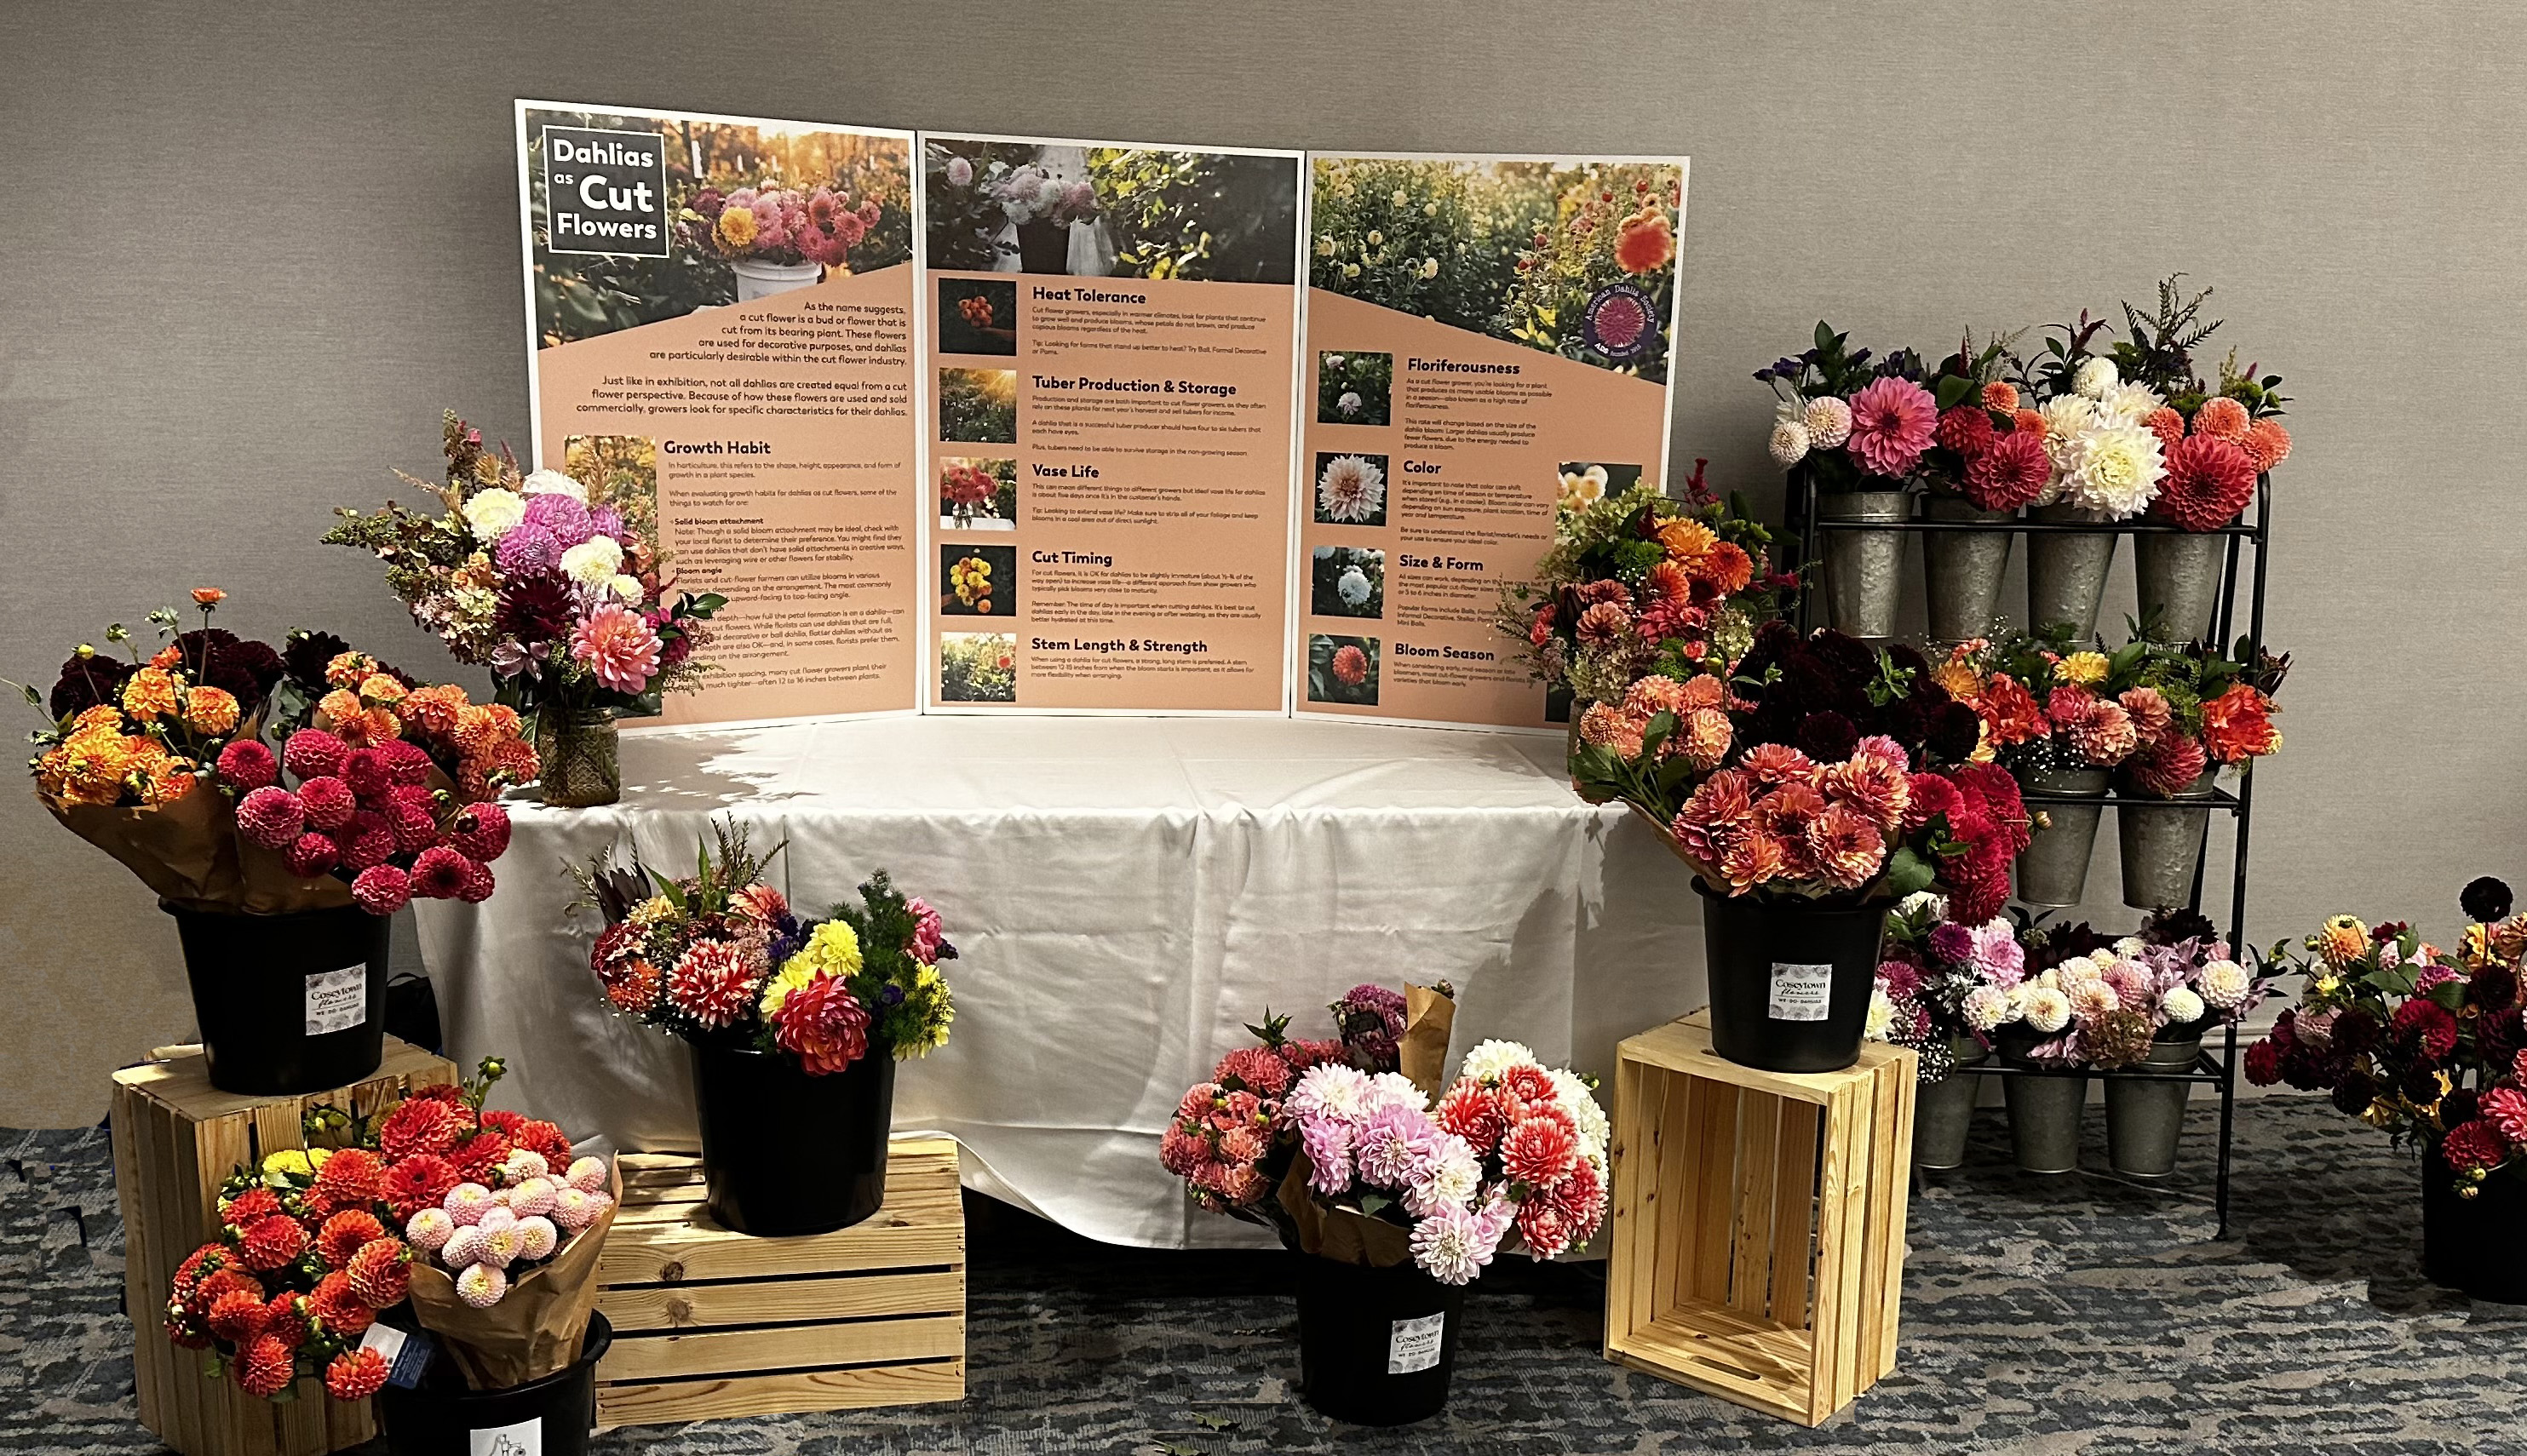 Display for cut flowers at ADS National Show